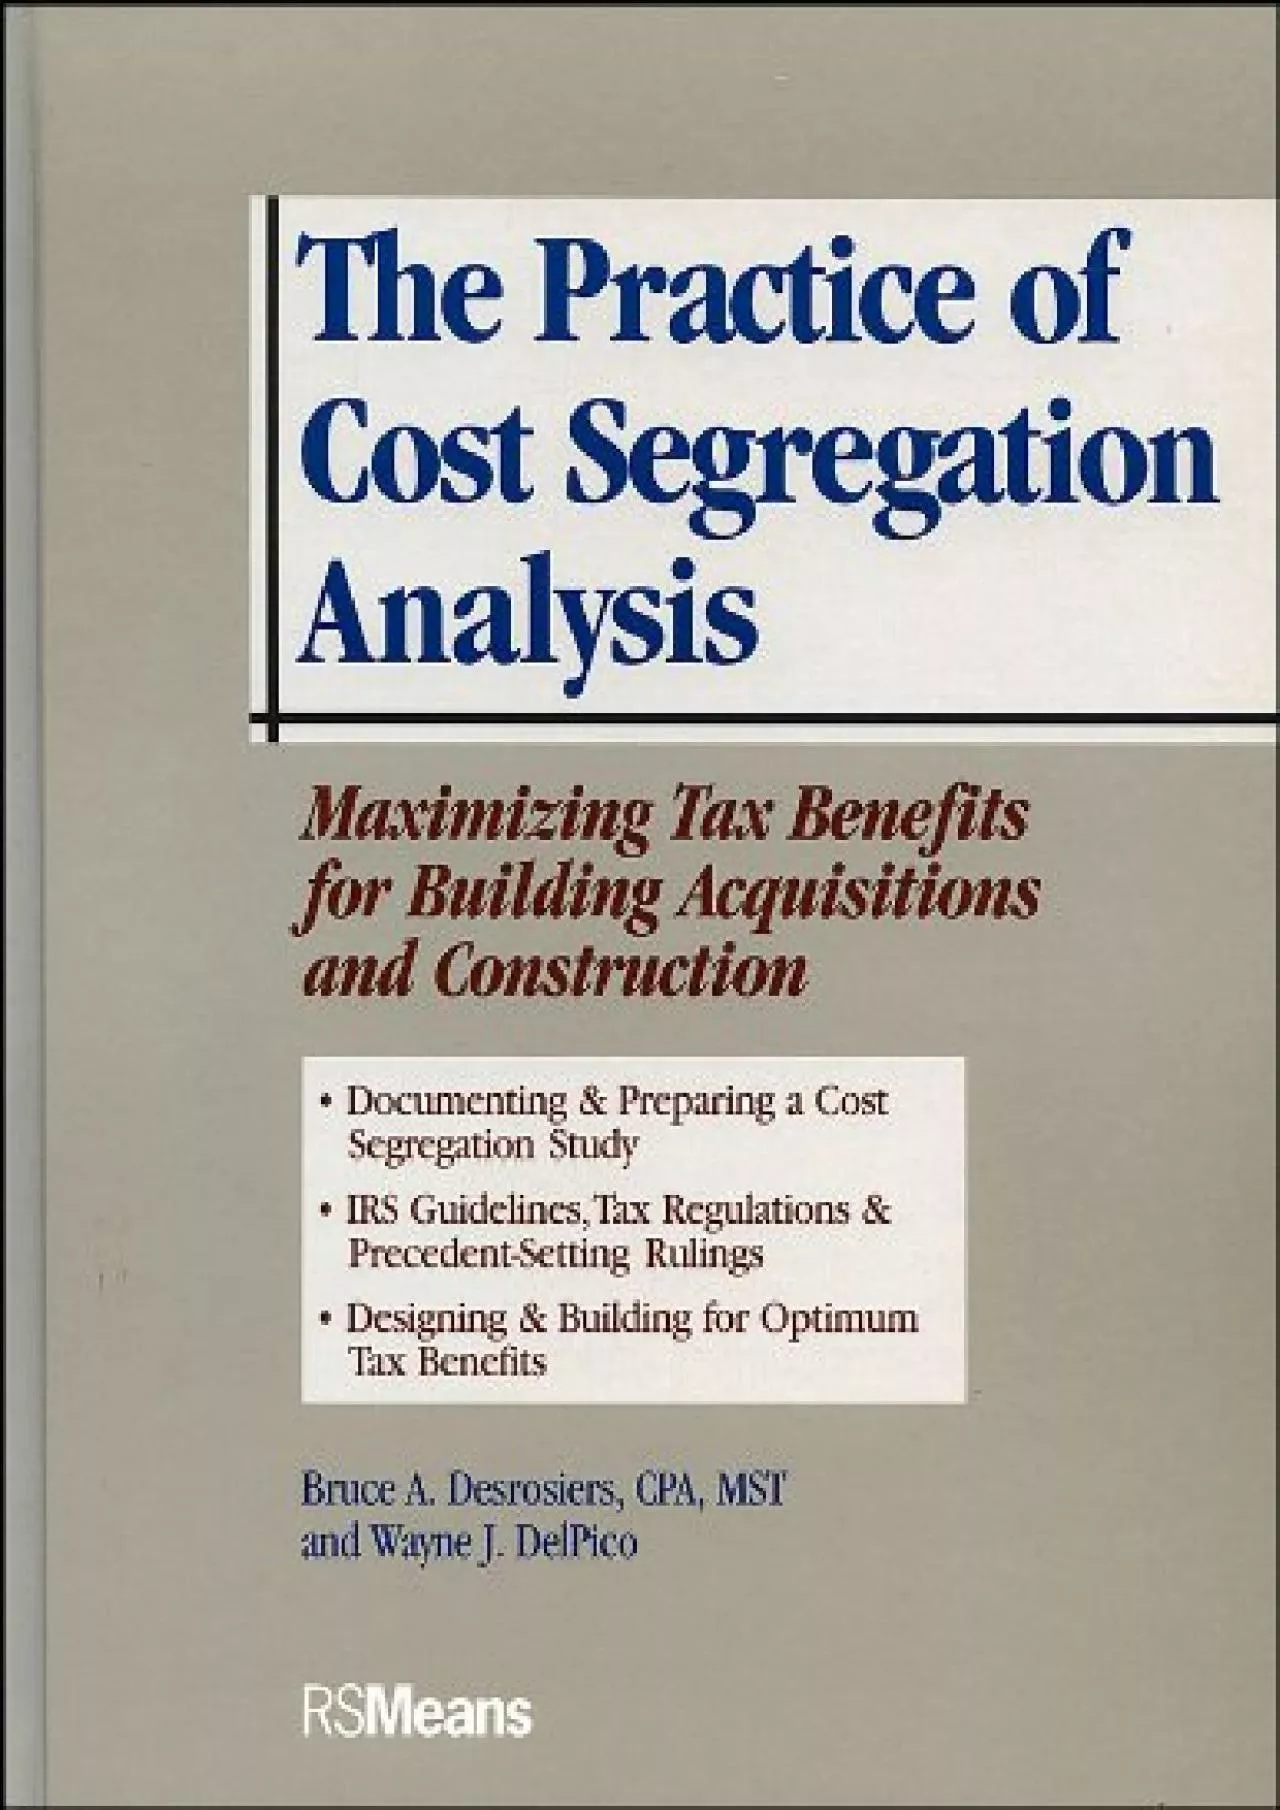 The Practice of Cost Segregation Analysis: Maximizing Tax Bennefits for Building Acquisitions